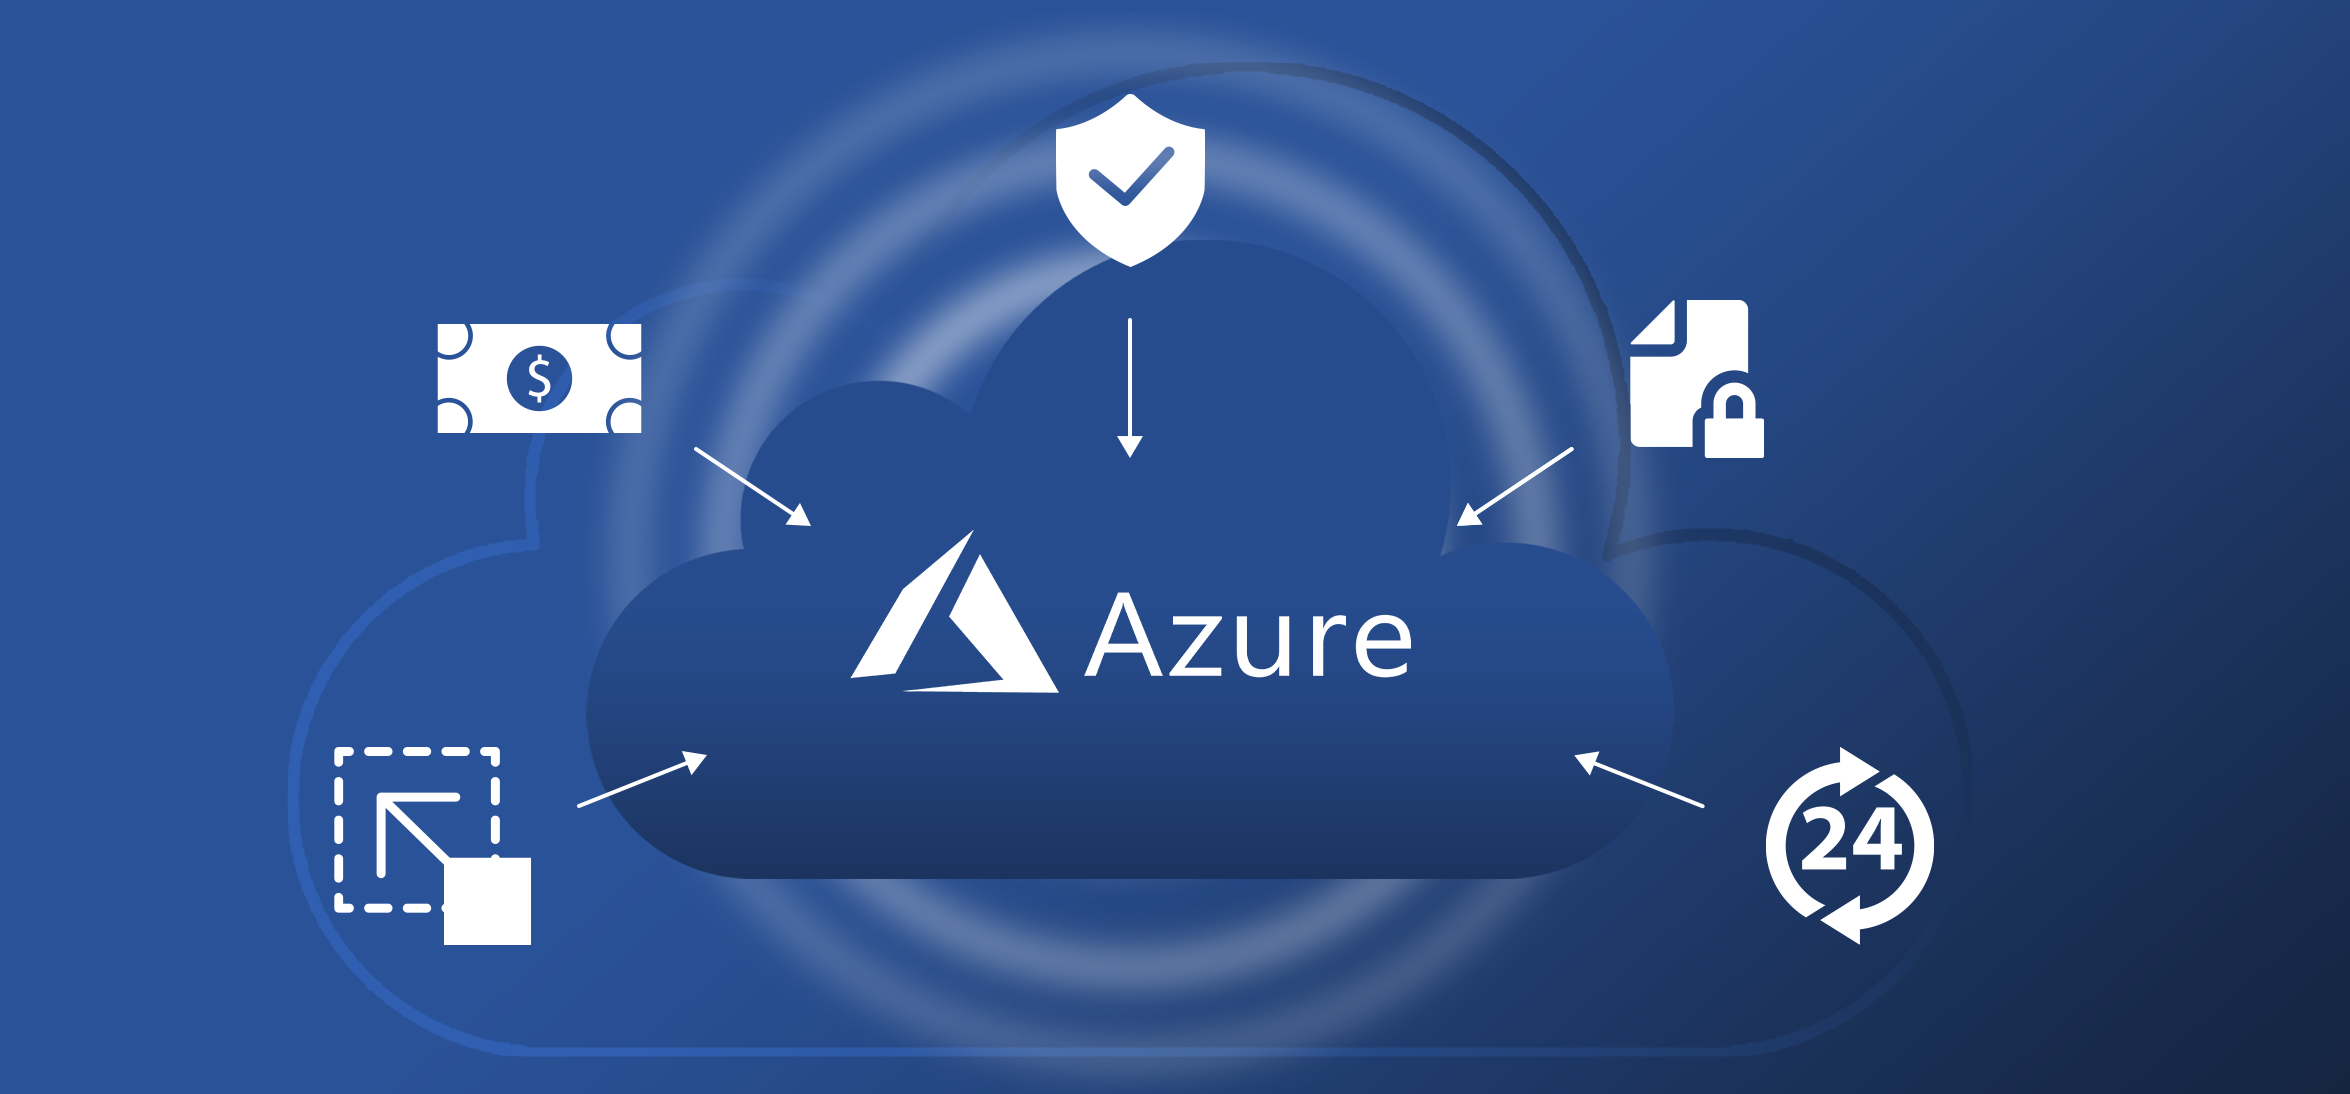 Microsoft Azure Administration and Consulting Services in Julian CA, 92036